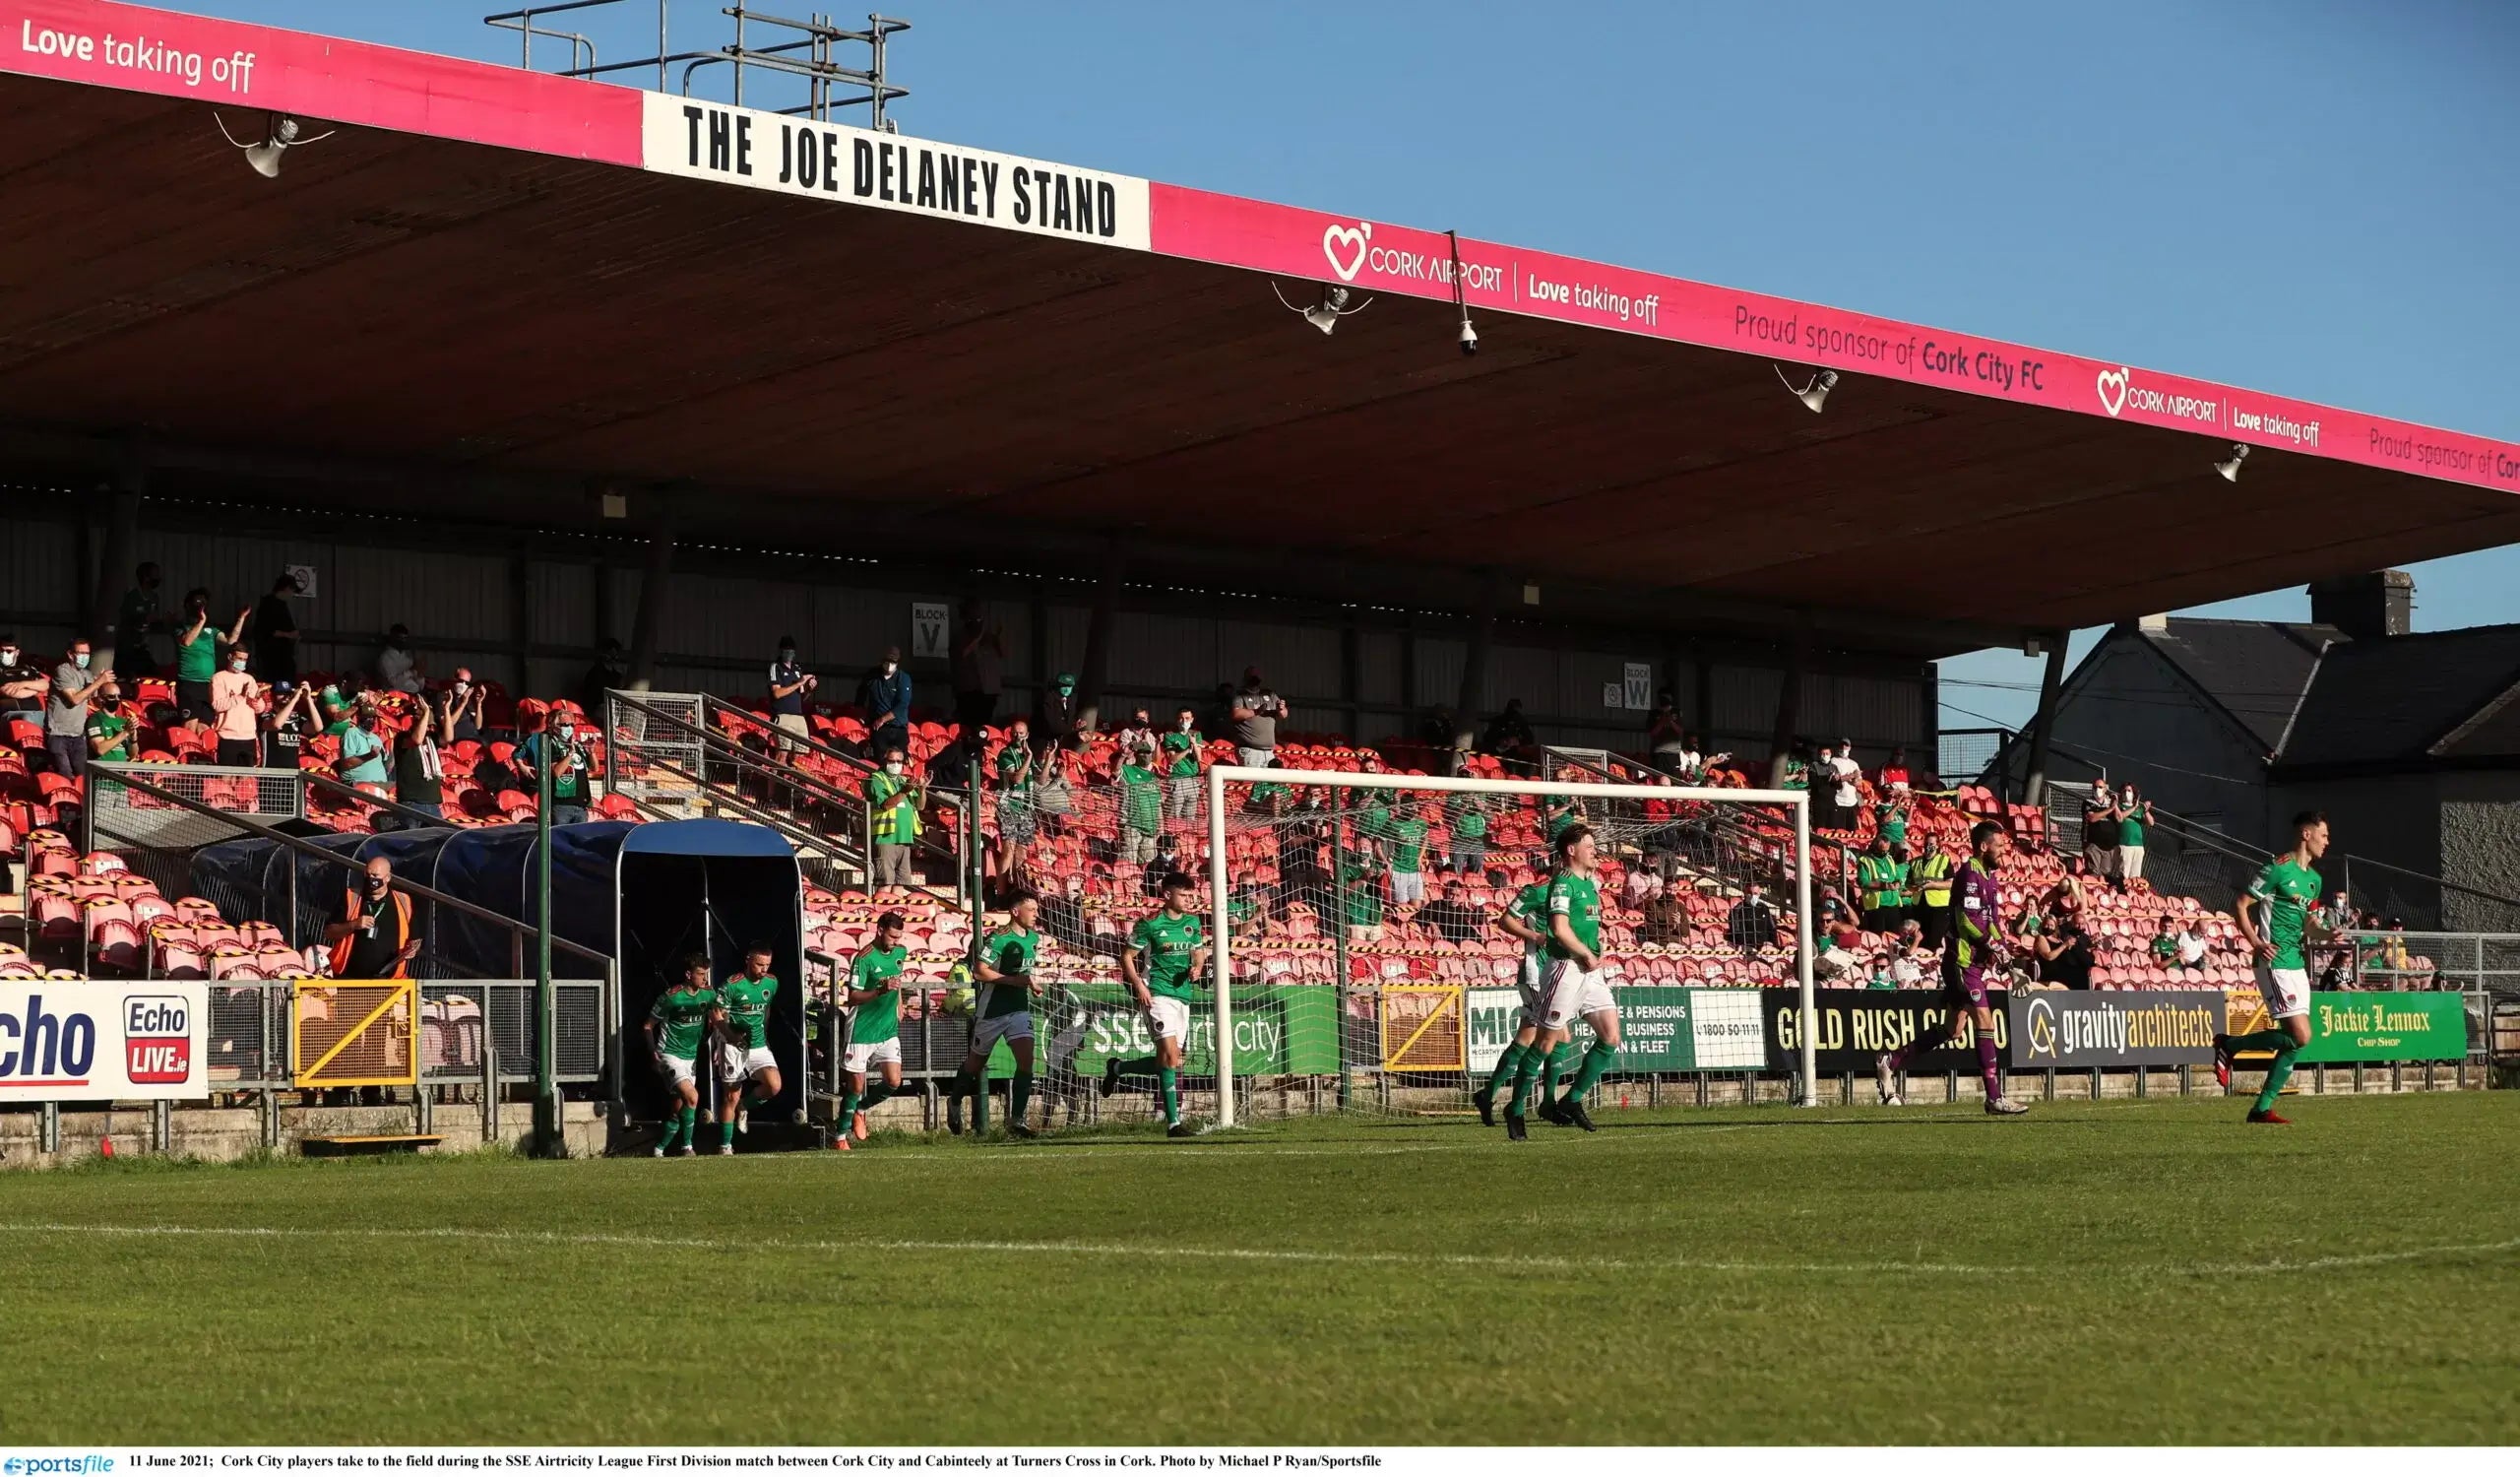 Updated Ticket Information for Athlone Town game